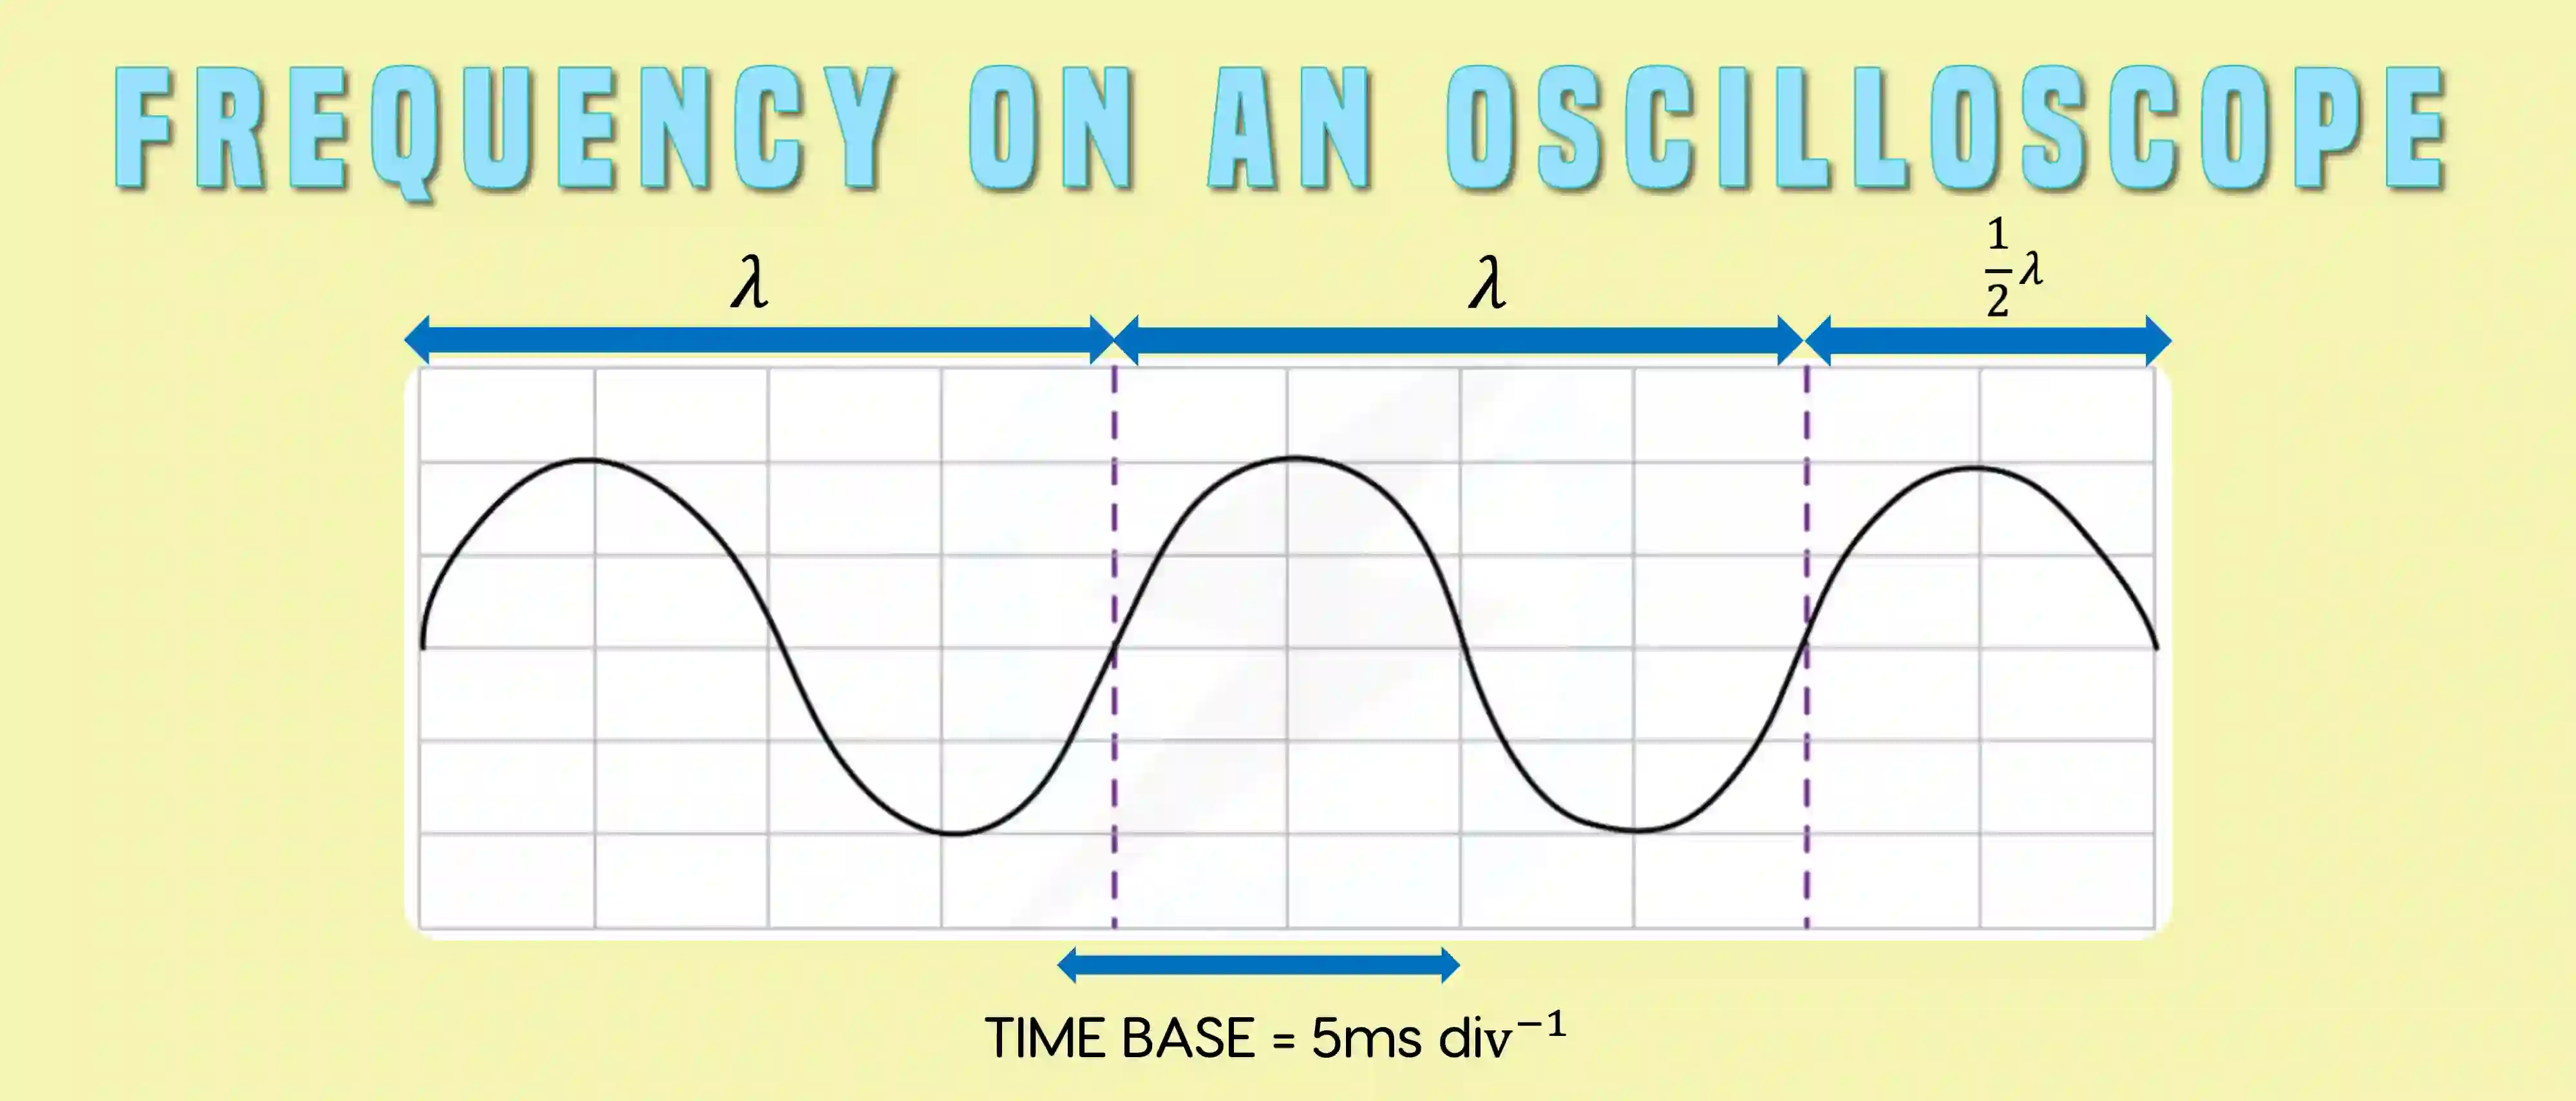 it shows how to read frequency on an oscilloscope